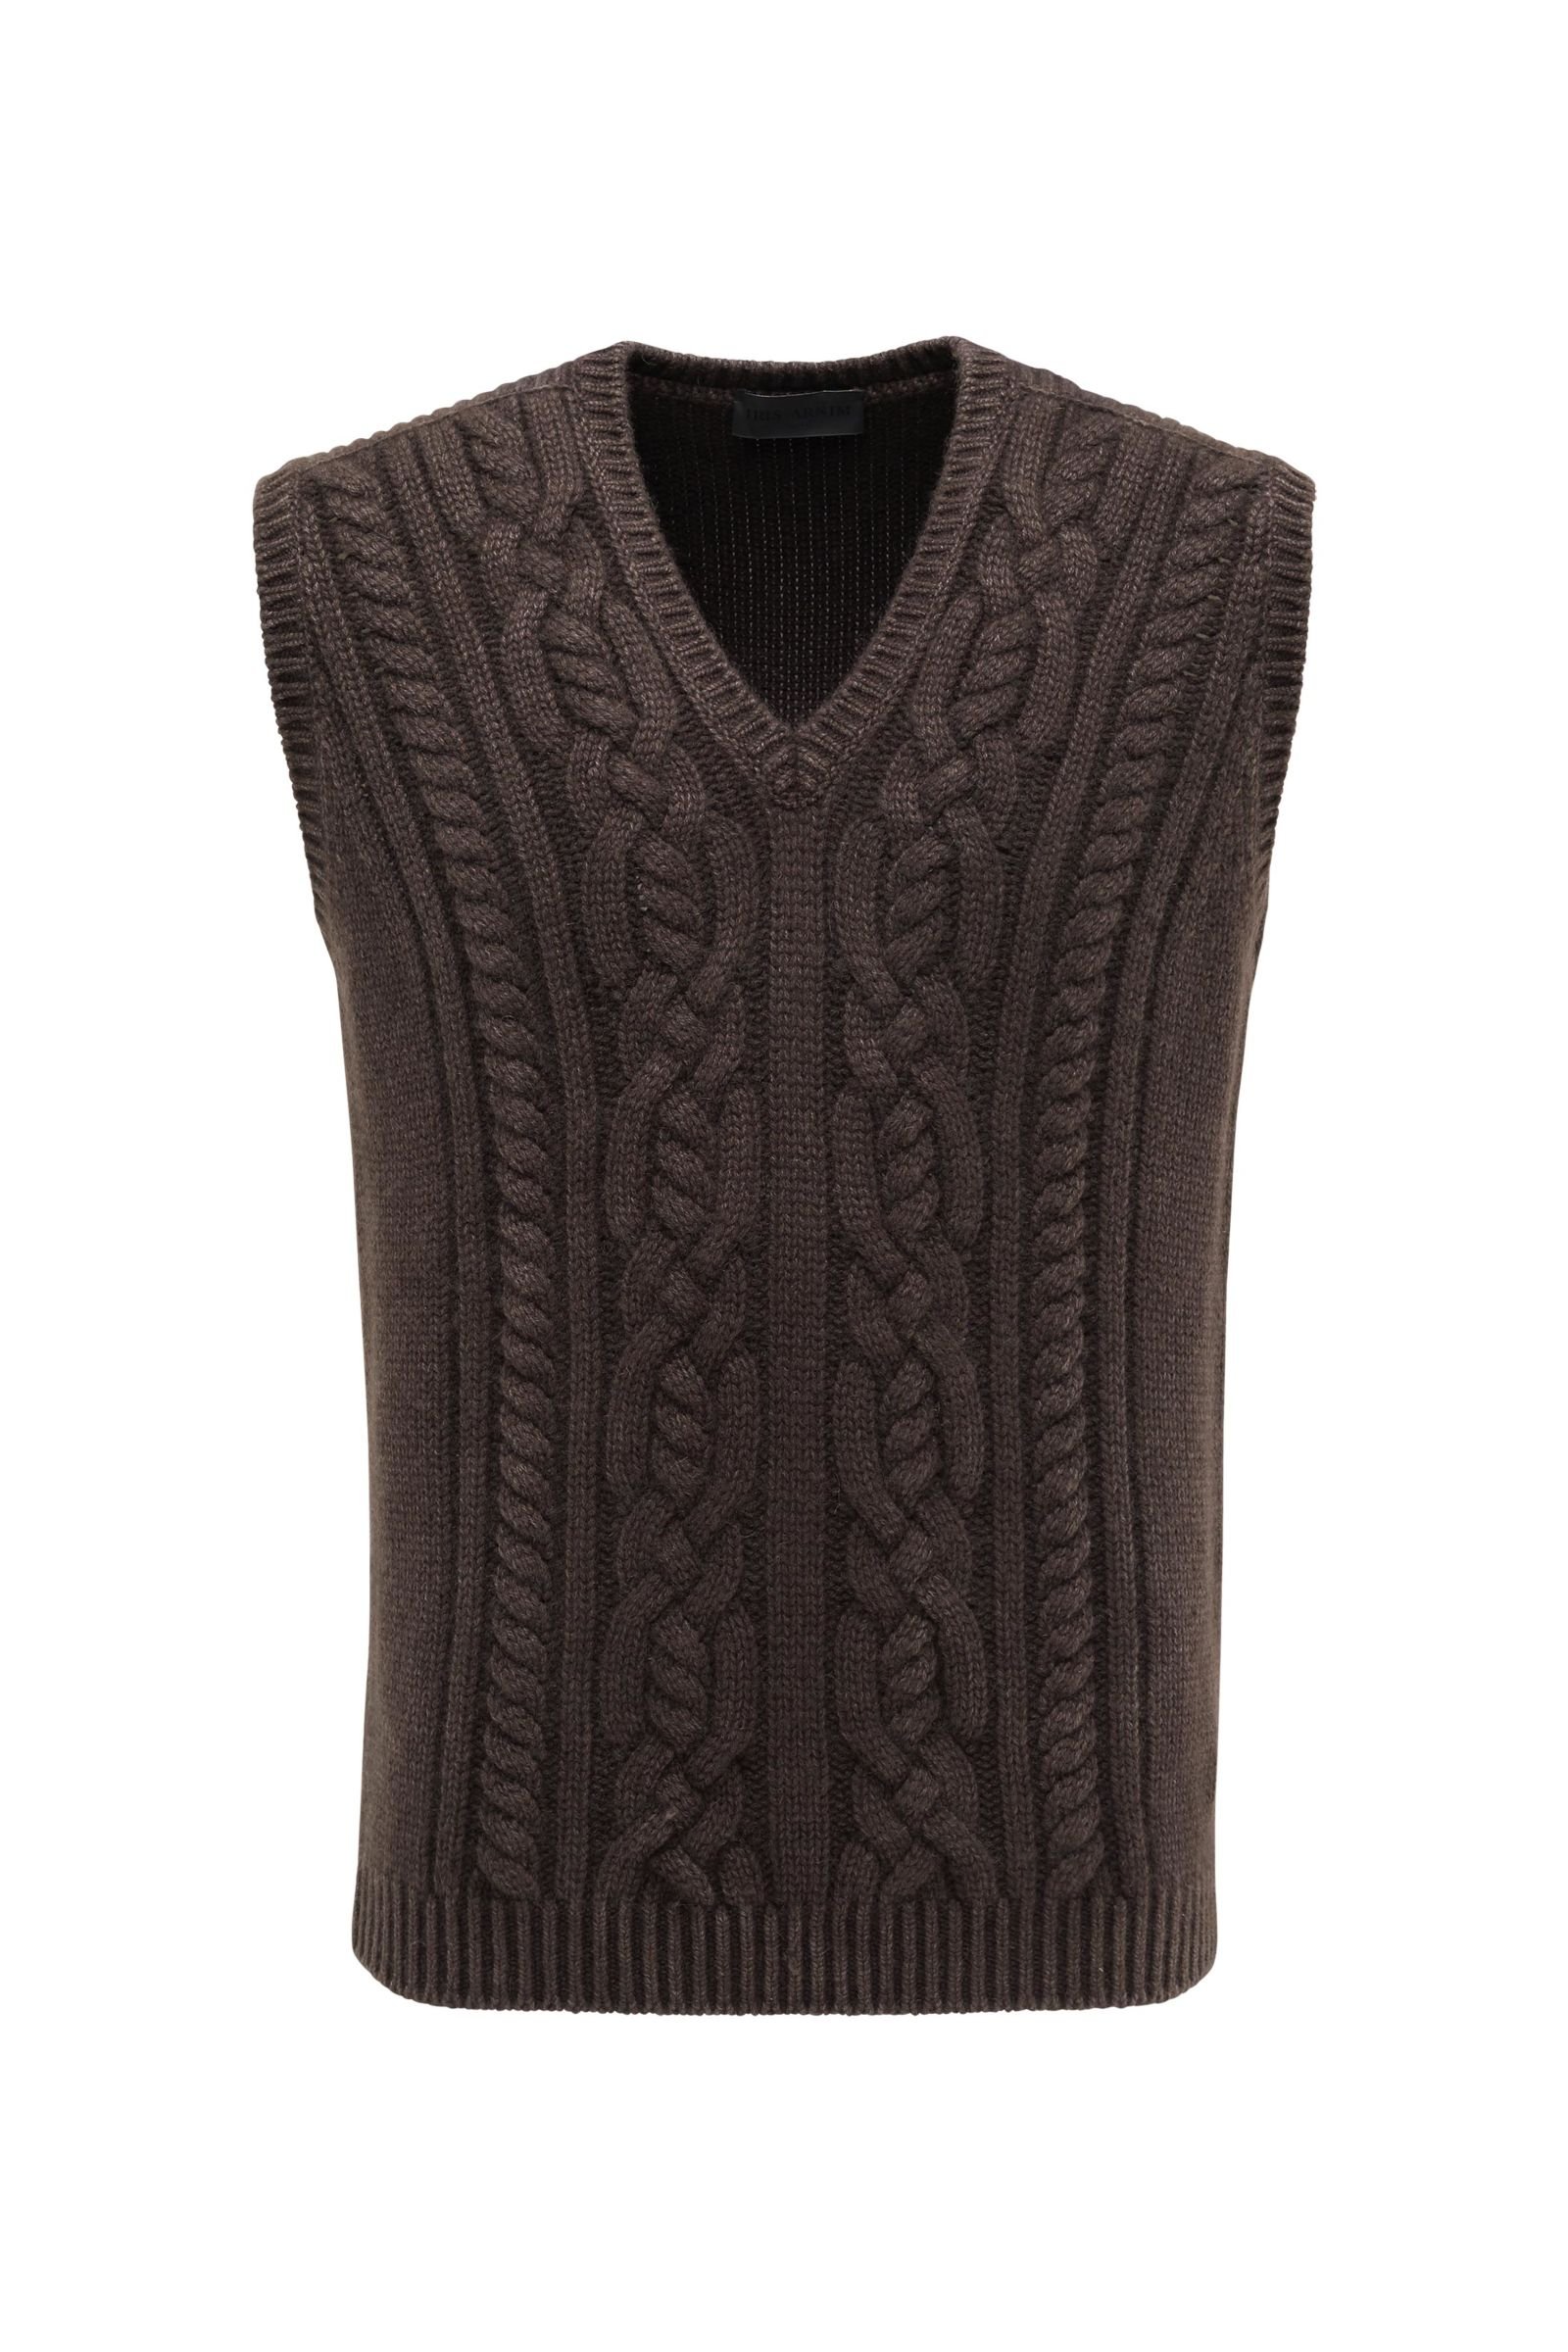 Cashmere sweater vest 'Odell' grey-brown